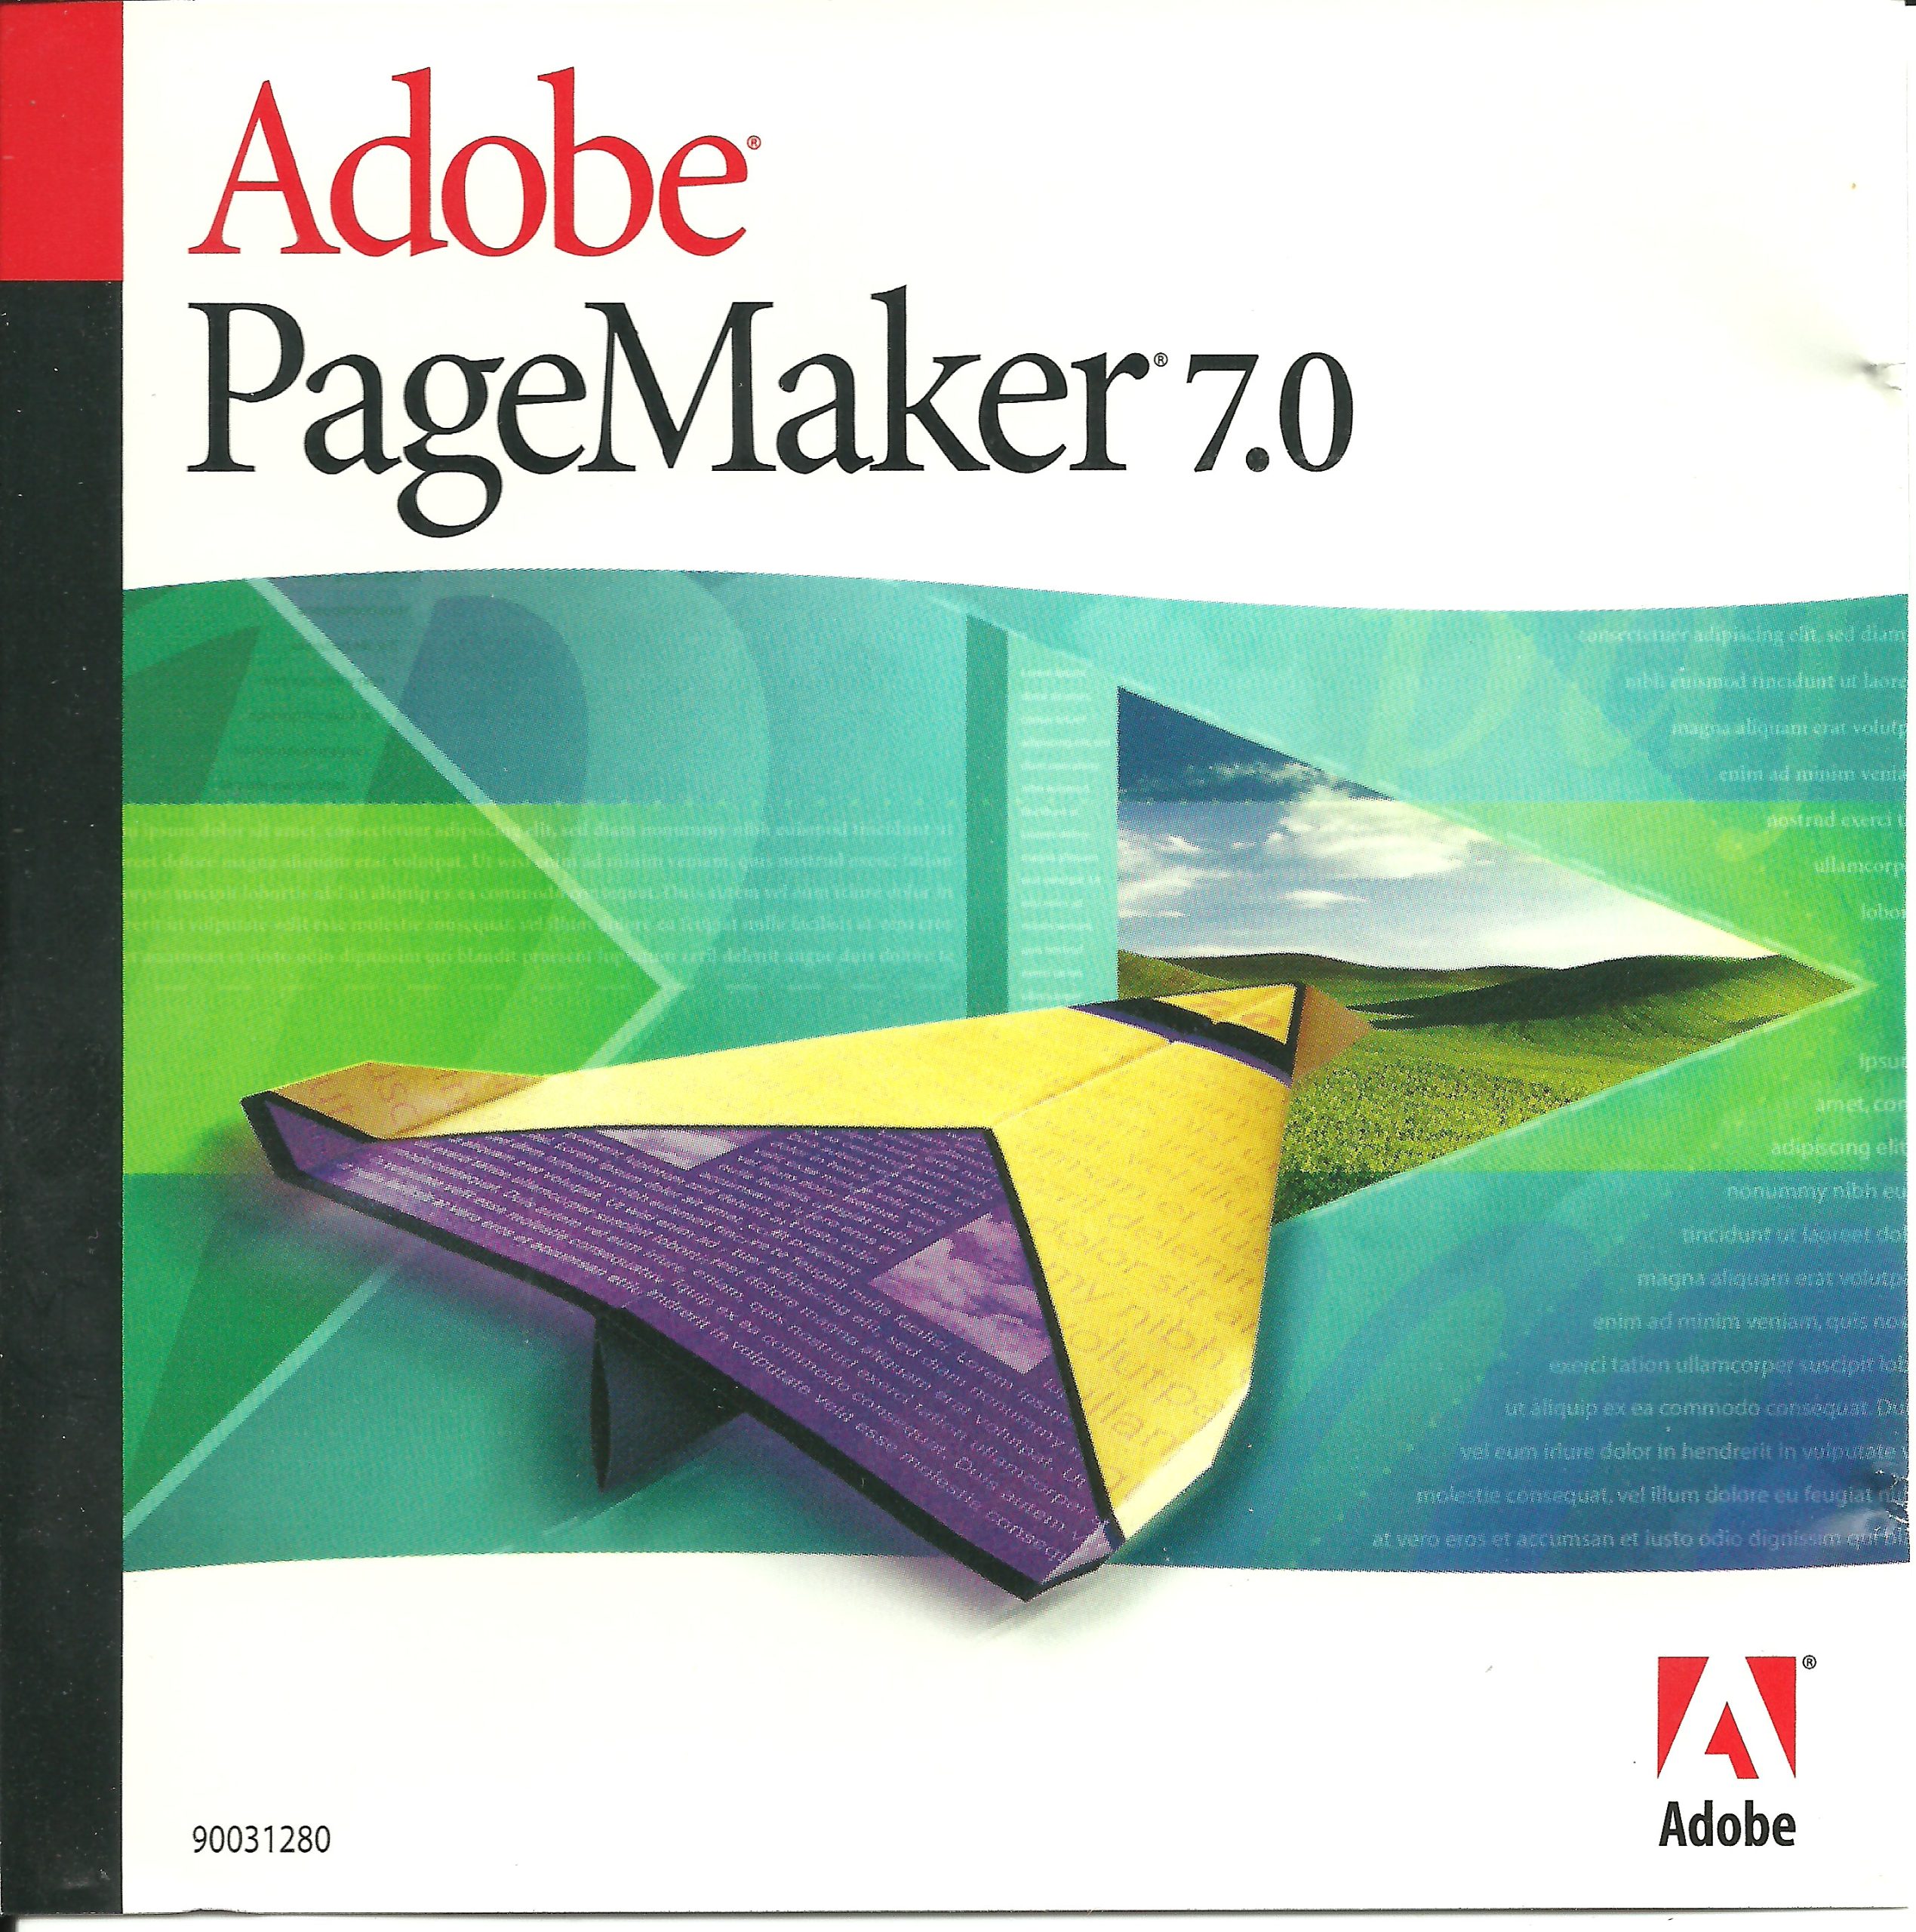 Adobe pagemaker download full version crack adobe after effects cs5 free download with crack for mac